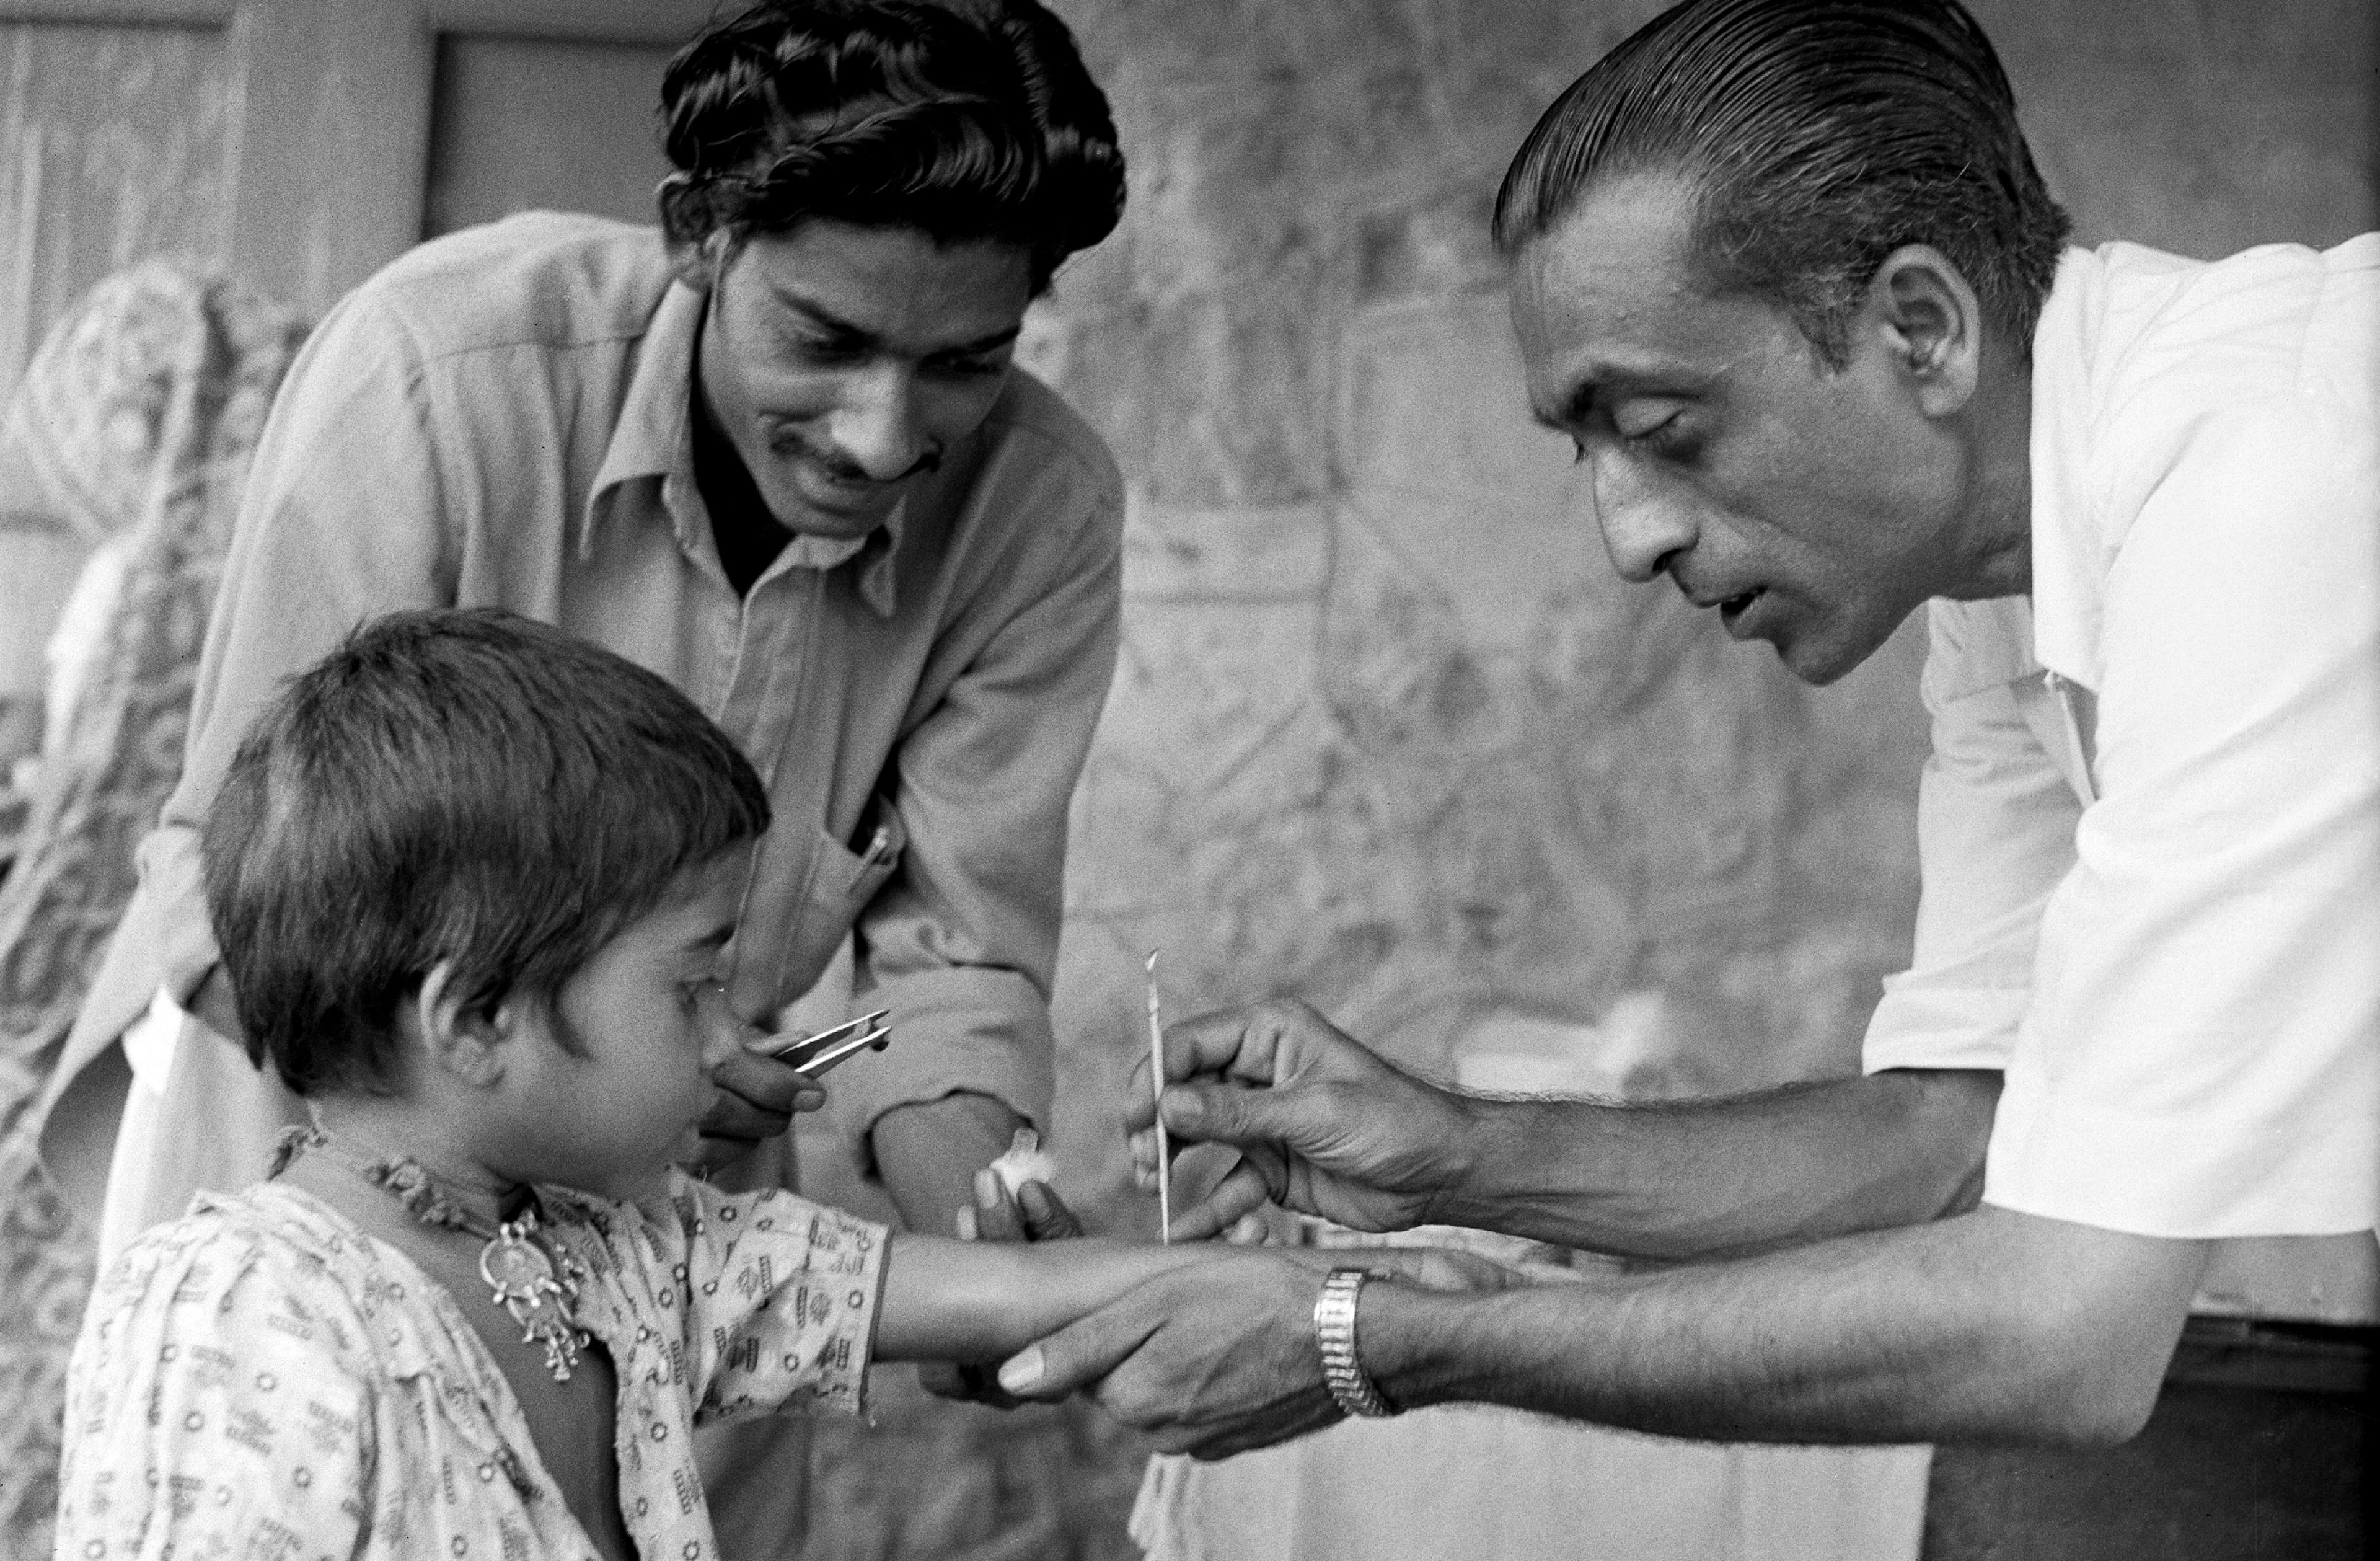 A girl watches a man health worker vaccinate her against smallpox.